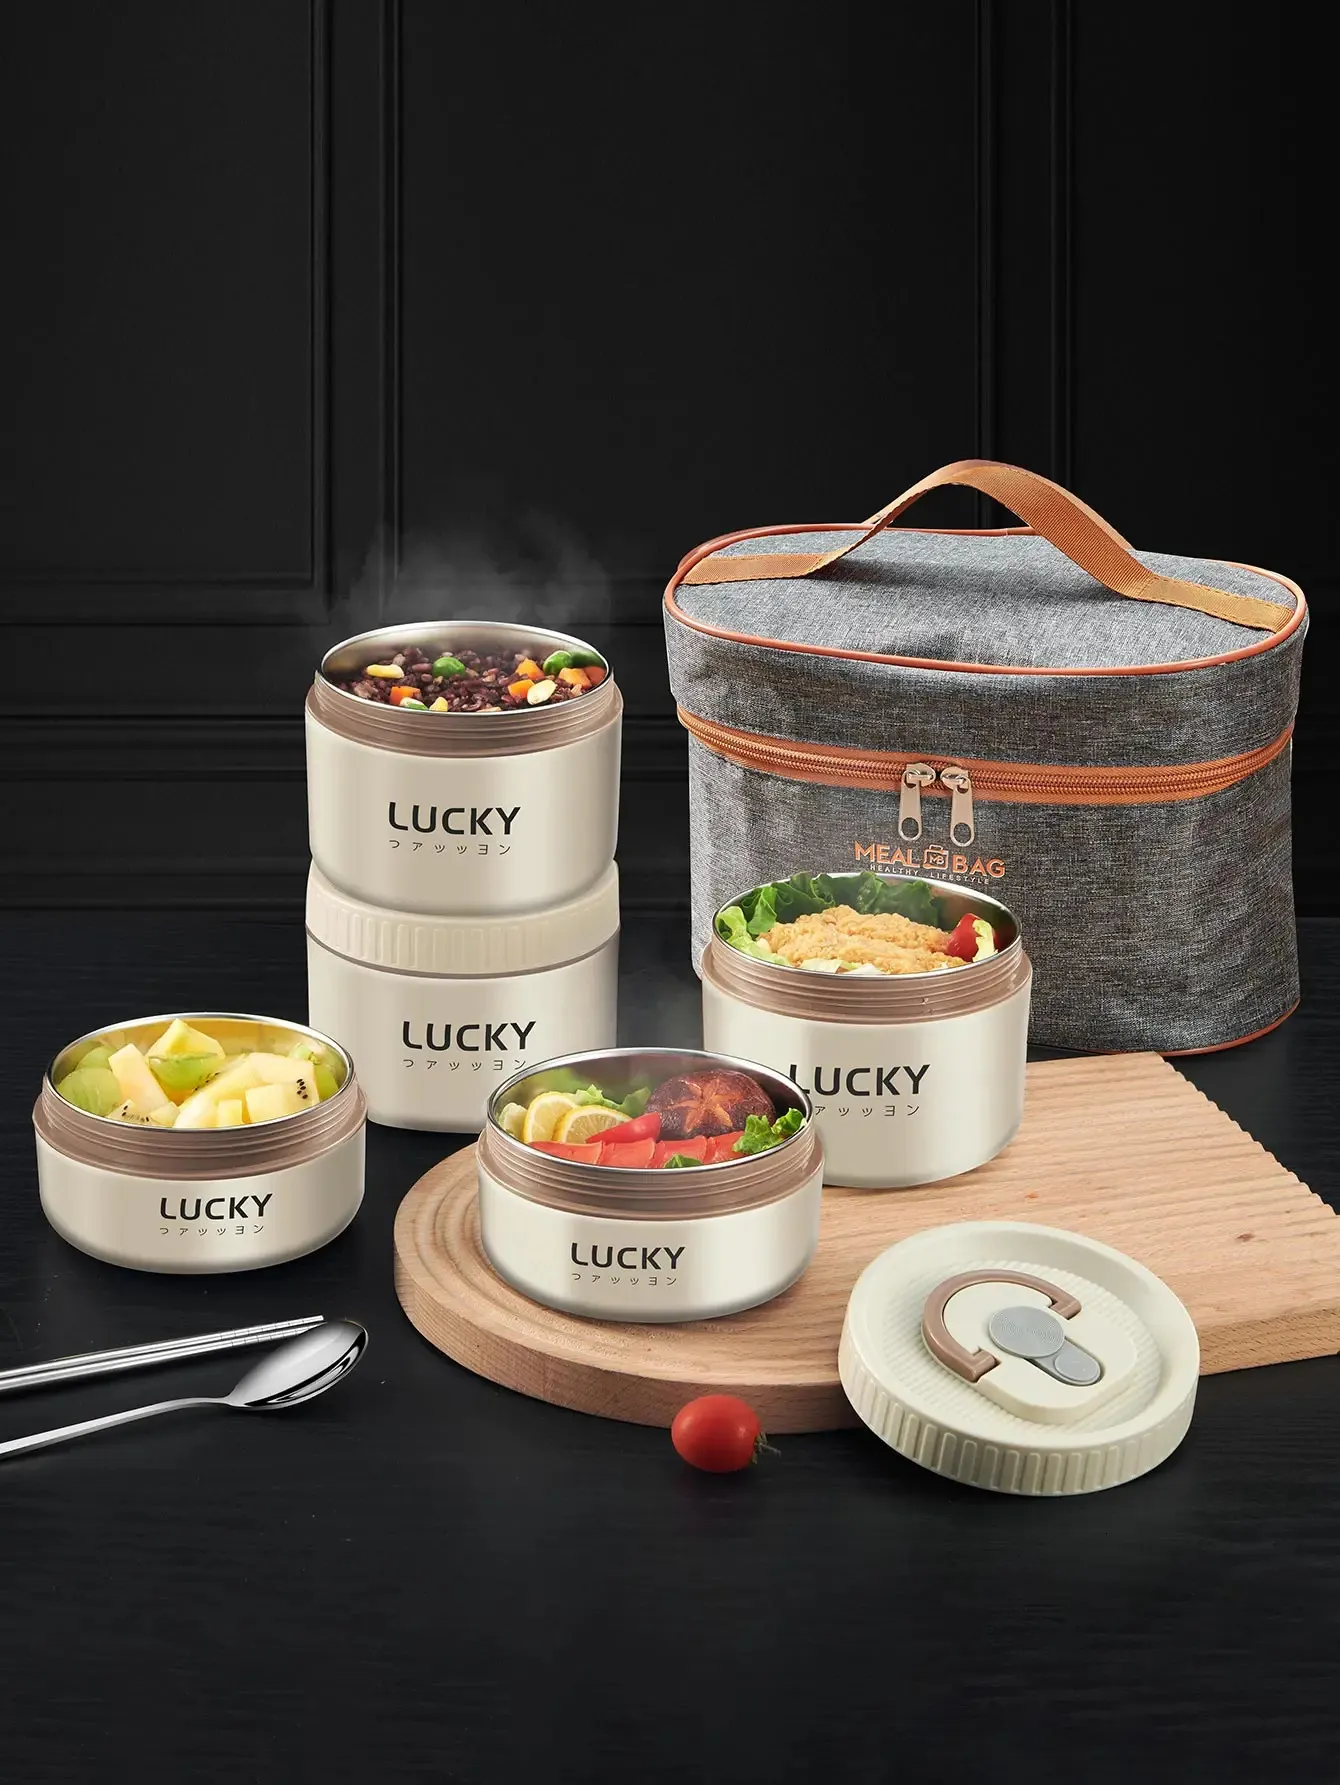 WORTHBUY 188 Stainless Steel Thermal Food Container Bento Lunch Box Set Portable Keep Warm Lunch Container With Insulated Bag 240416